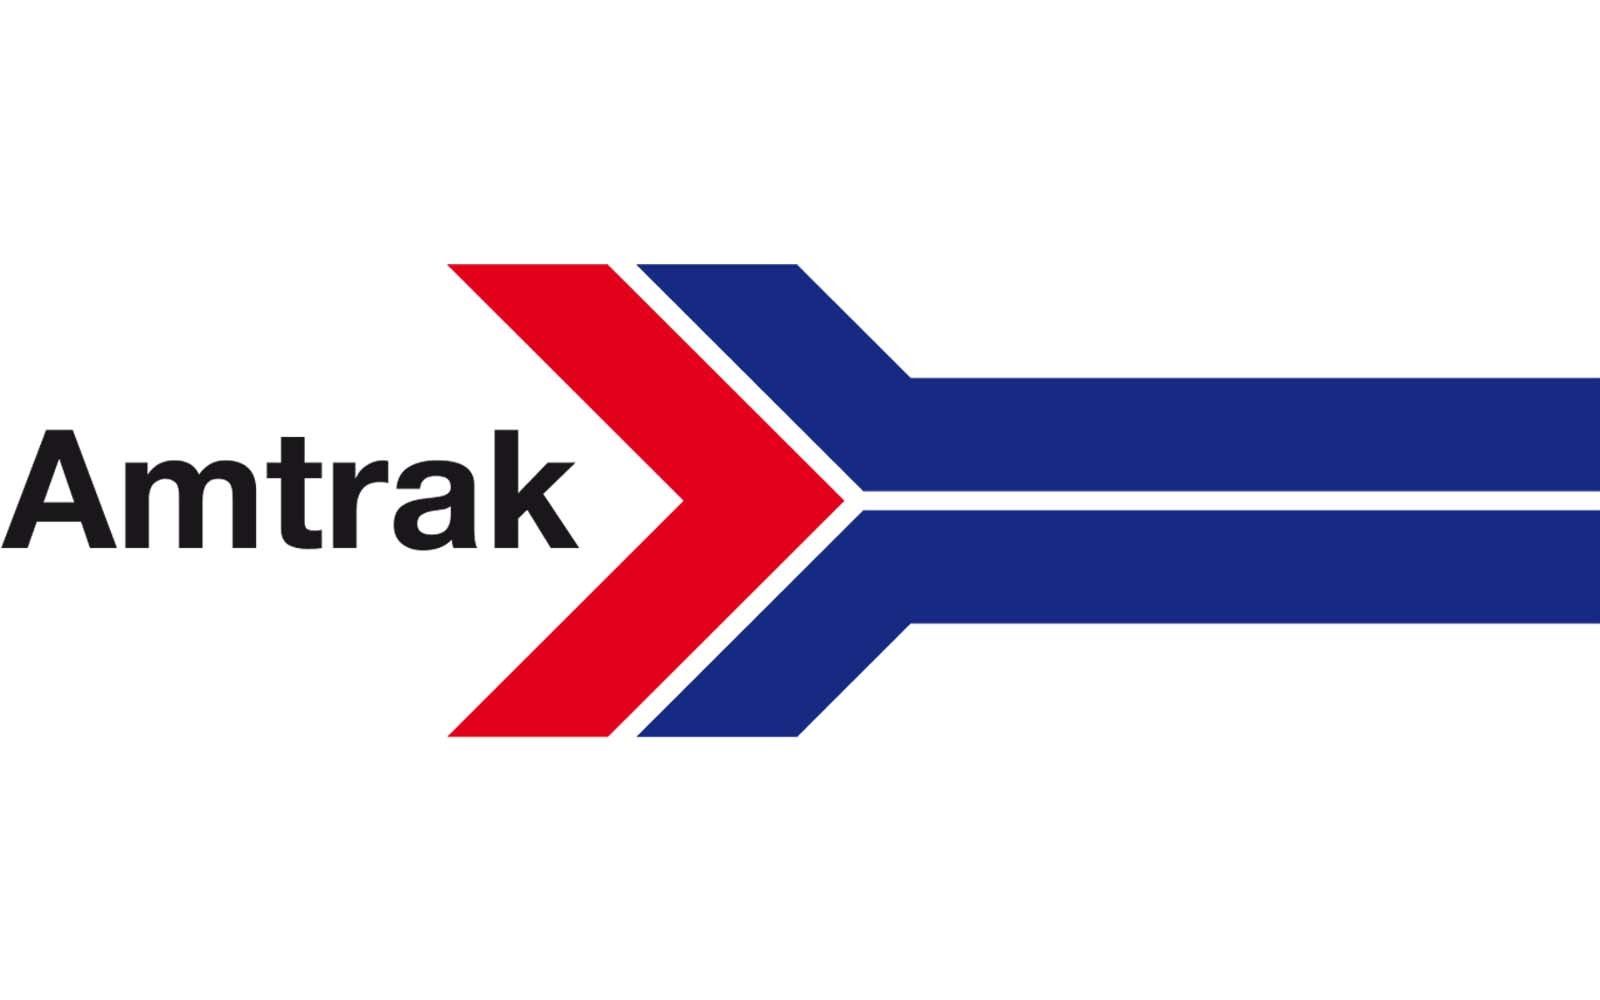 Network Rail Logo and symbol, meaning, history, PNG